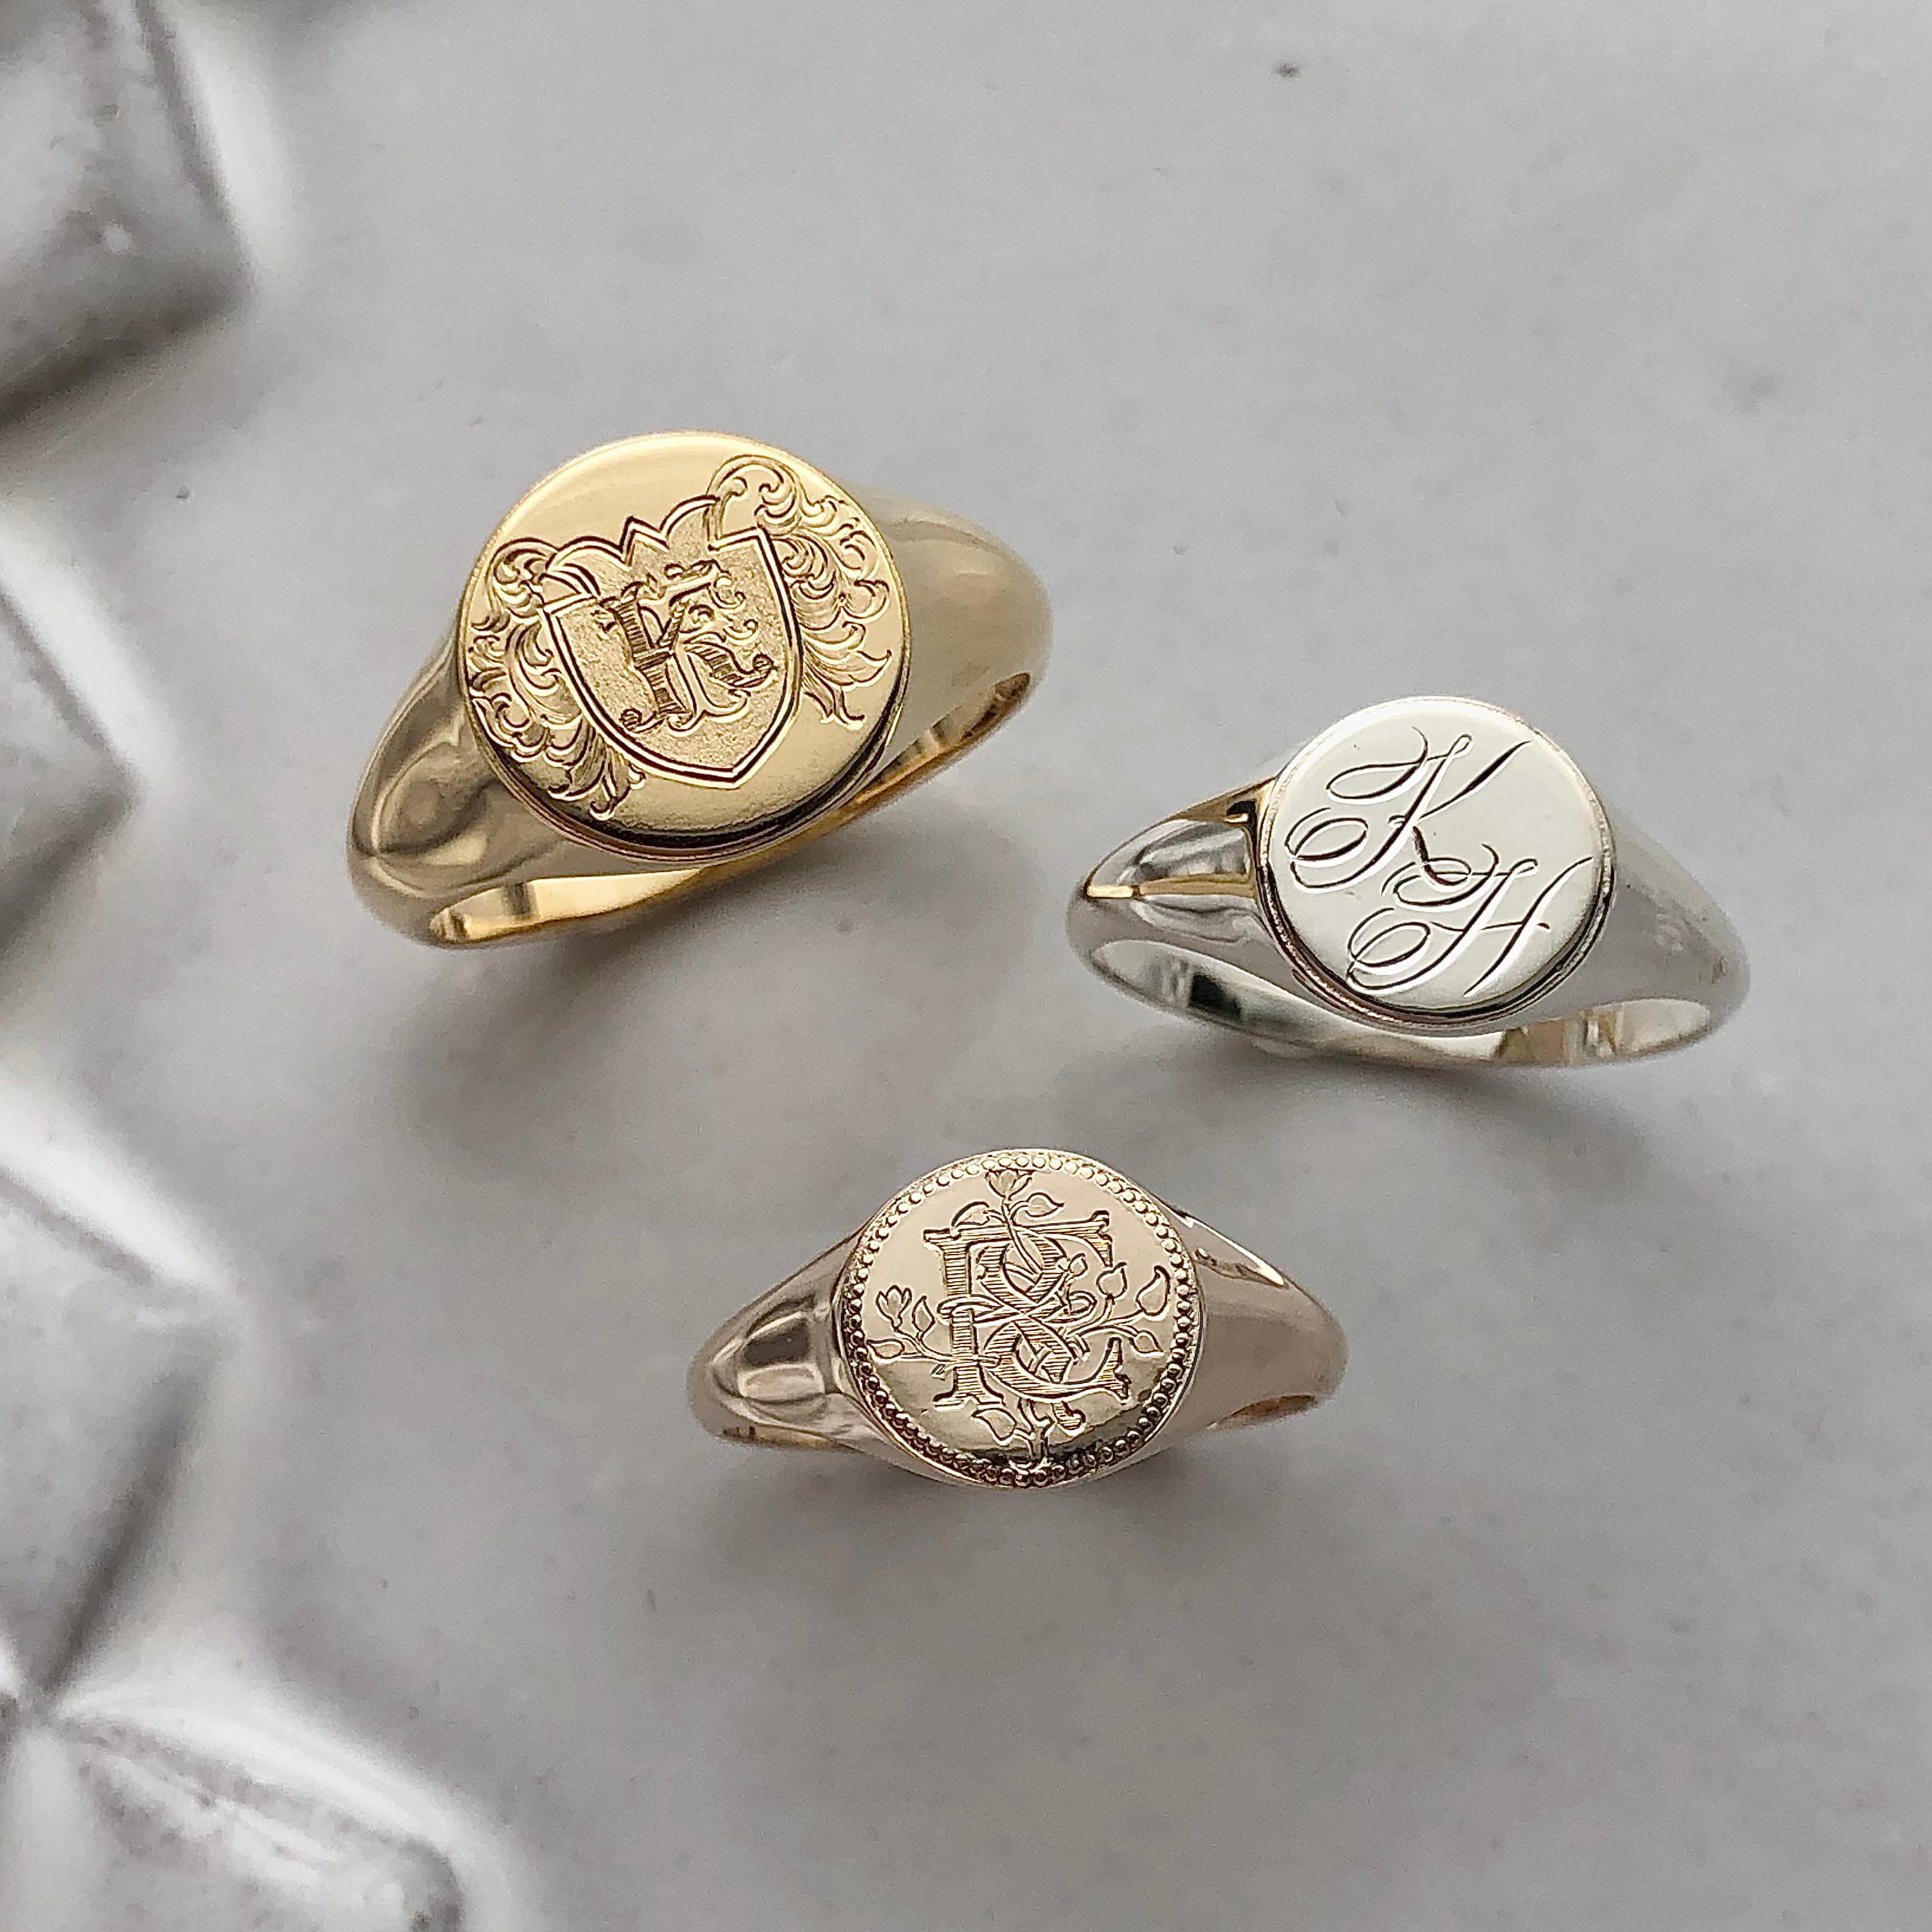 【K18】Small Round Signet Ring